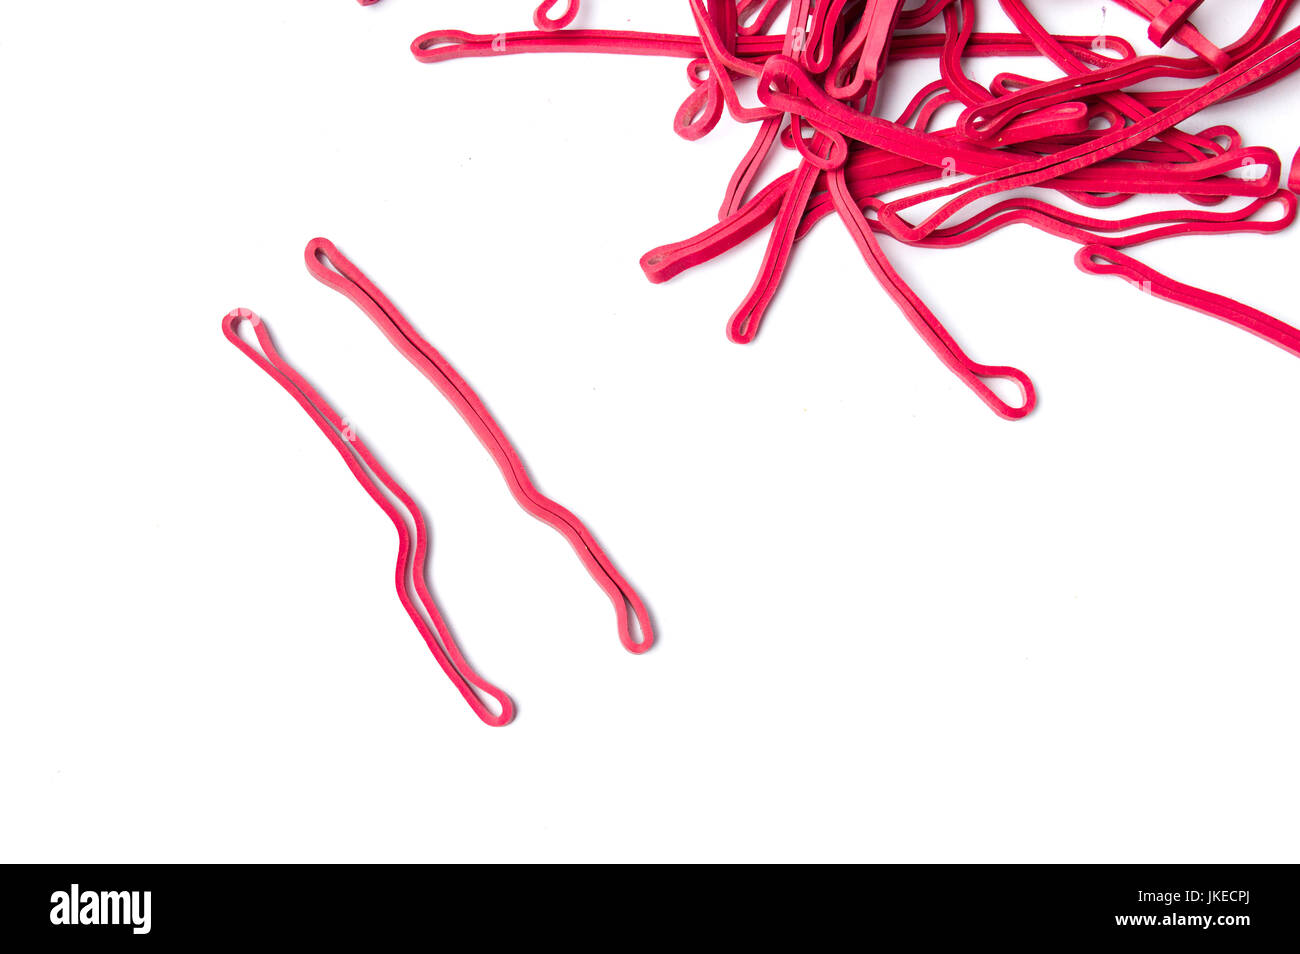 Bunch of red rubber bands isolated on white Stock Photo